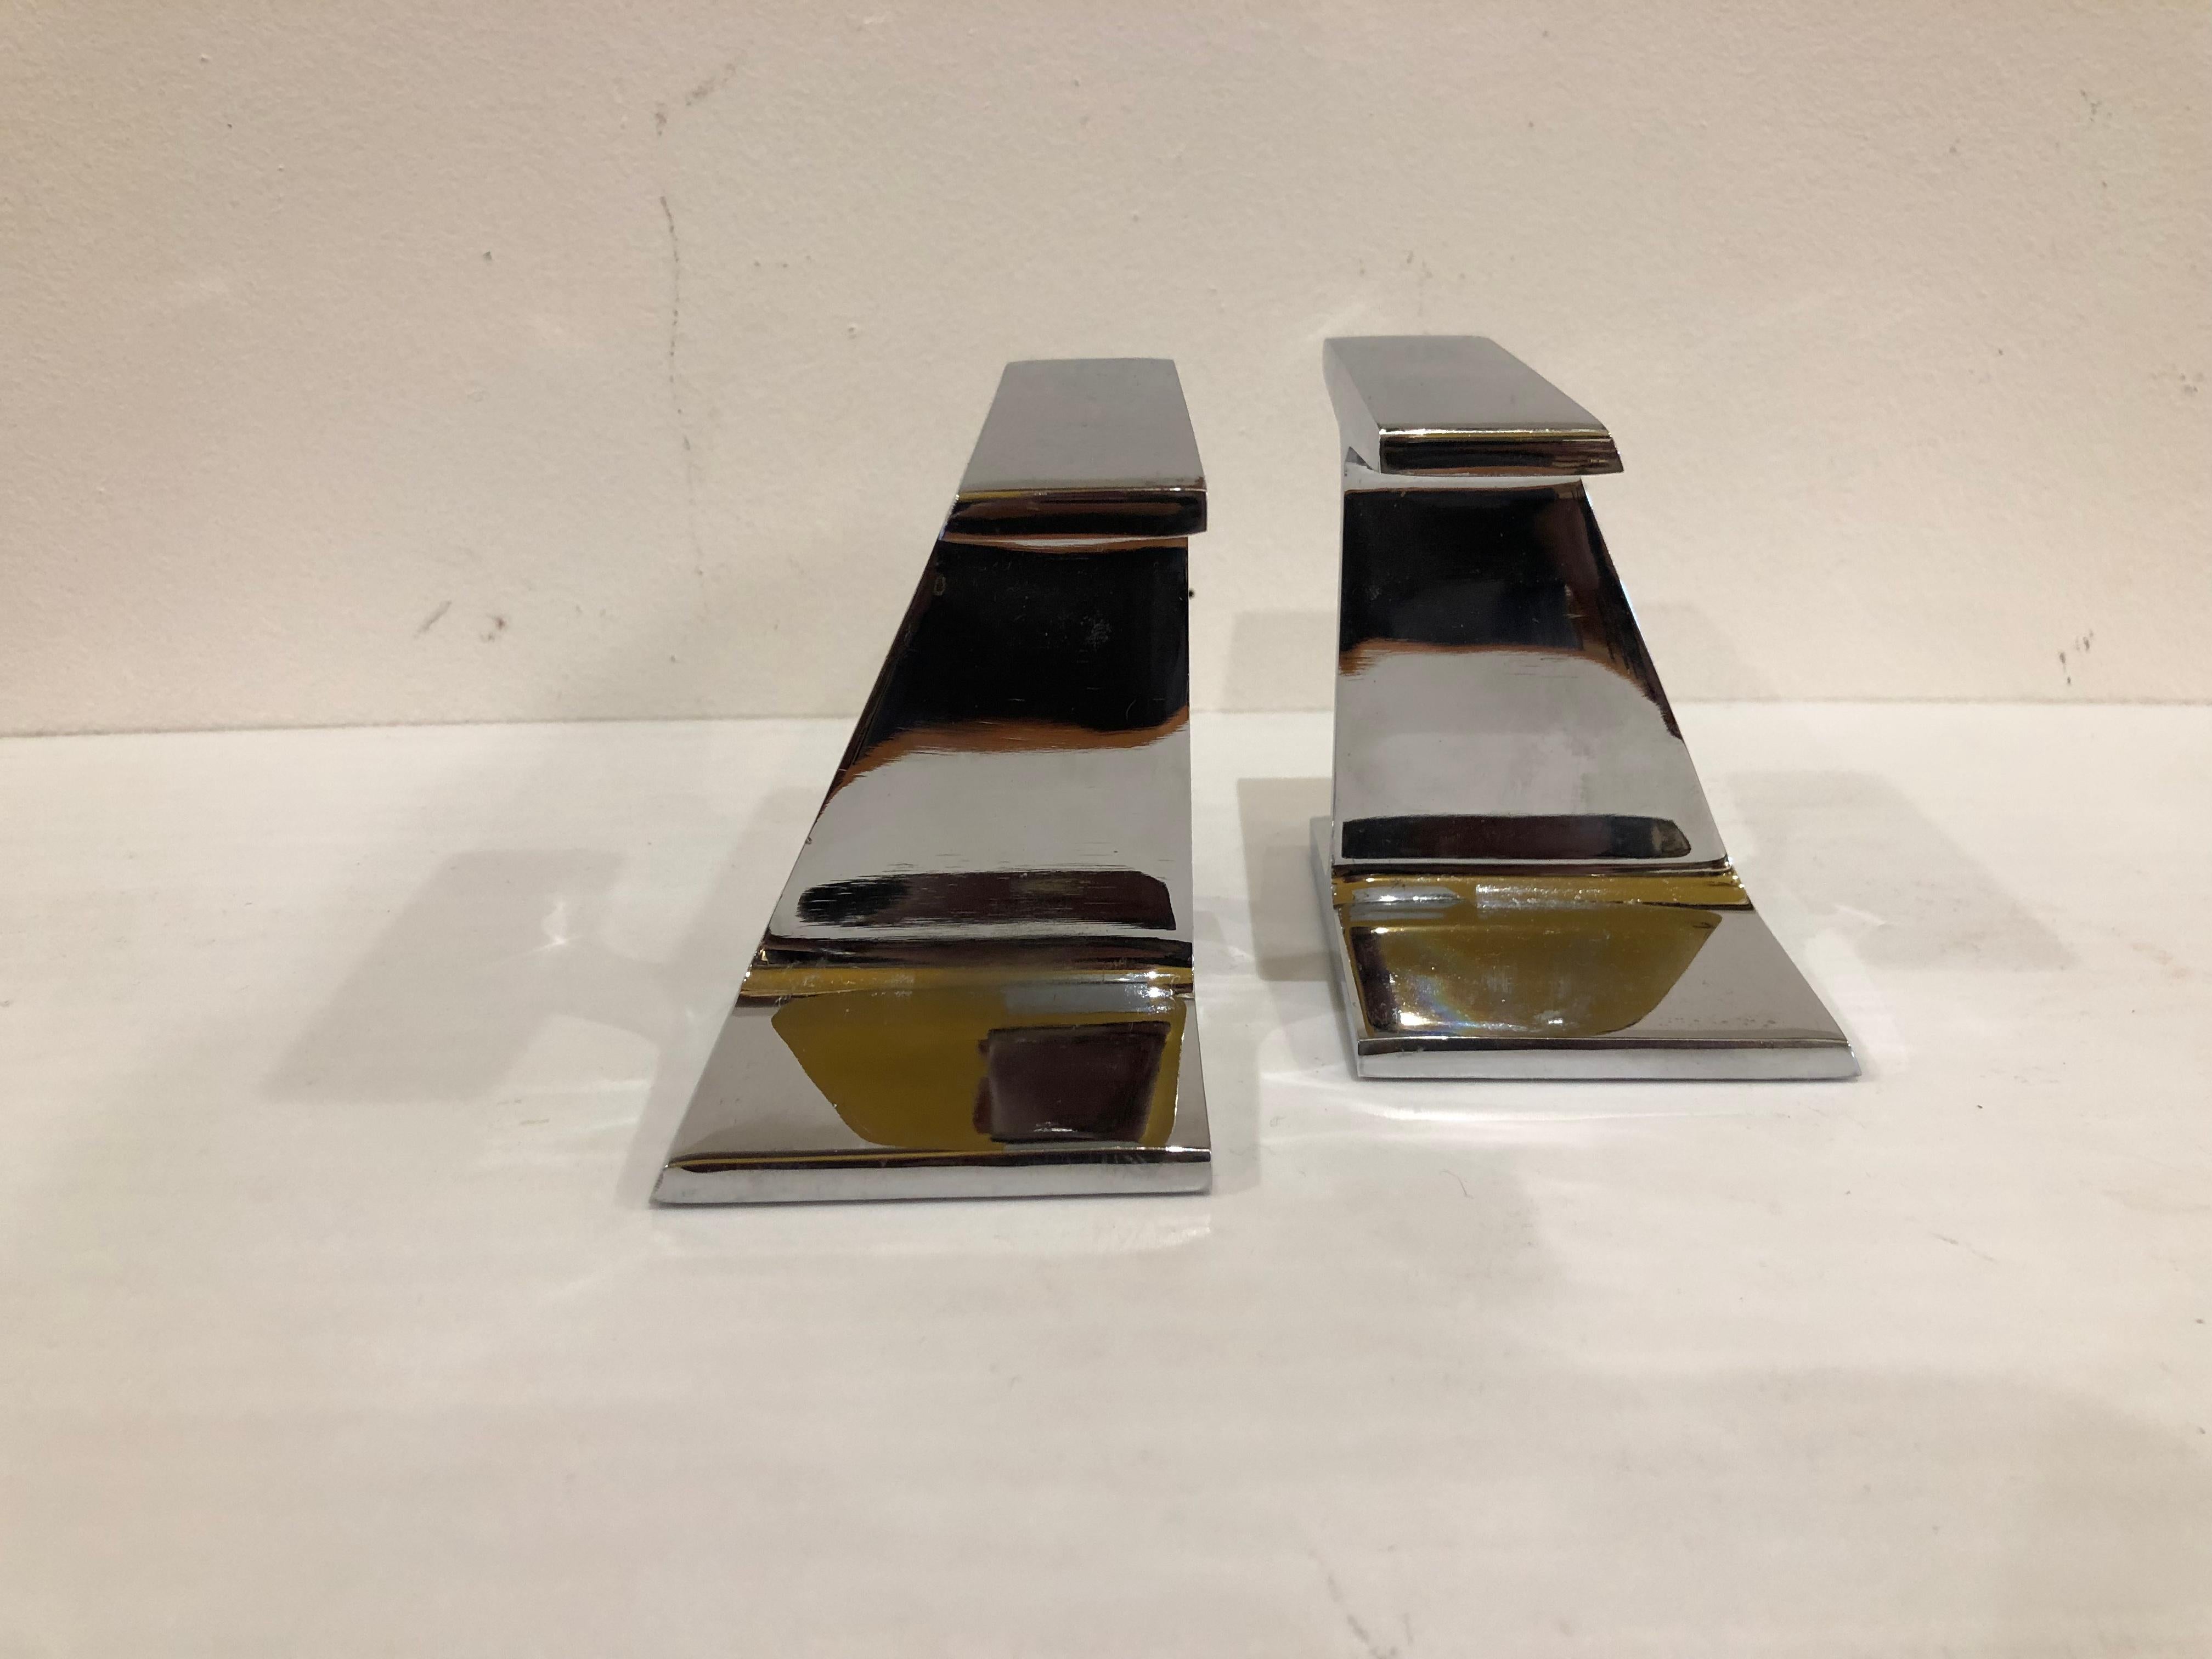 Modernist pair of steel I beam bookends by bill curry for design line, rare set to find in great condition have a commemorative label for Kaiser steel.